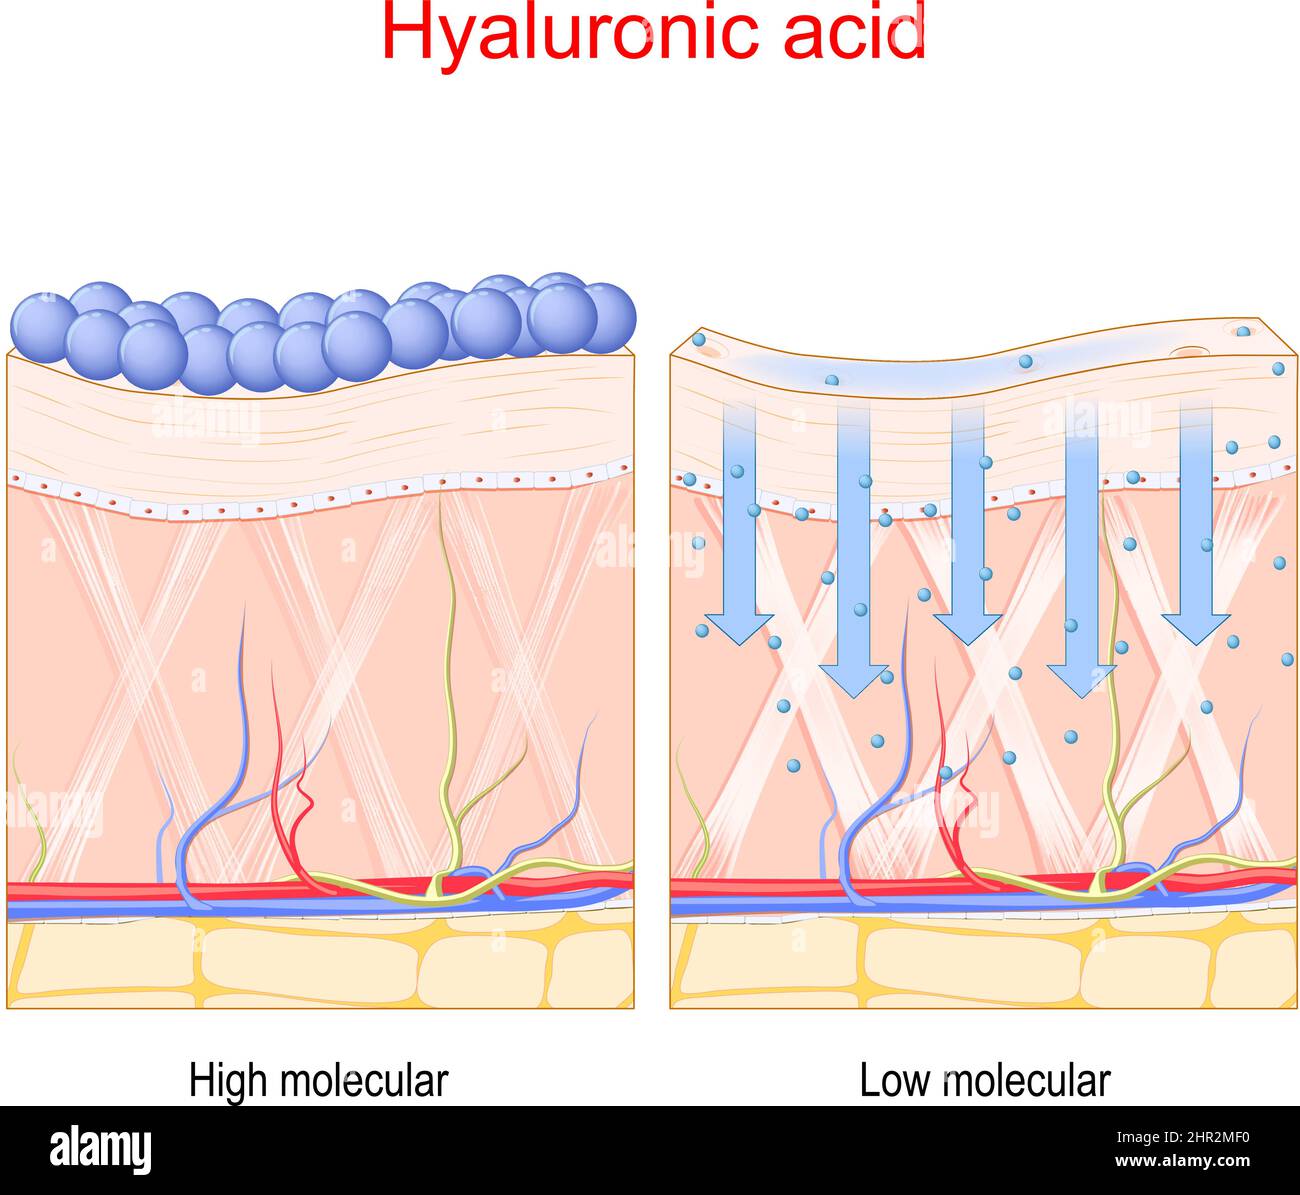 Hyaluronic acid. Penetration in the skin of Low and High molecule Hyaluronic acid. vector poster about skin care and anti-aging therapy Stock Vector